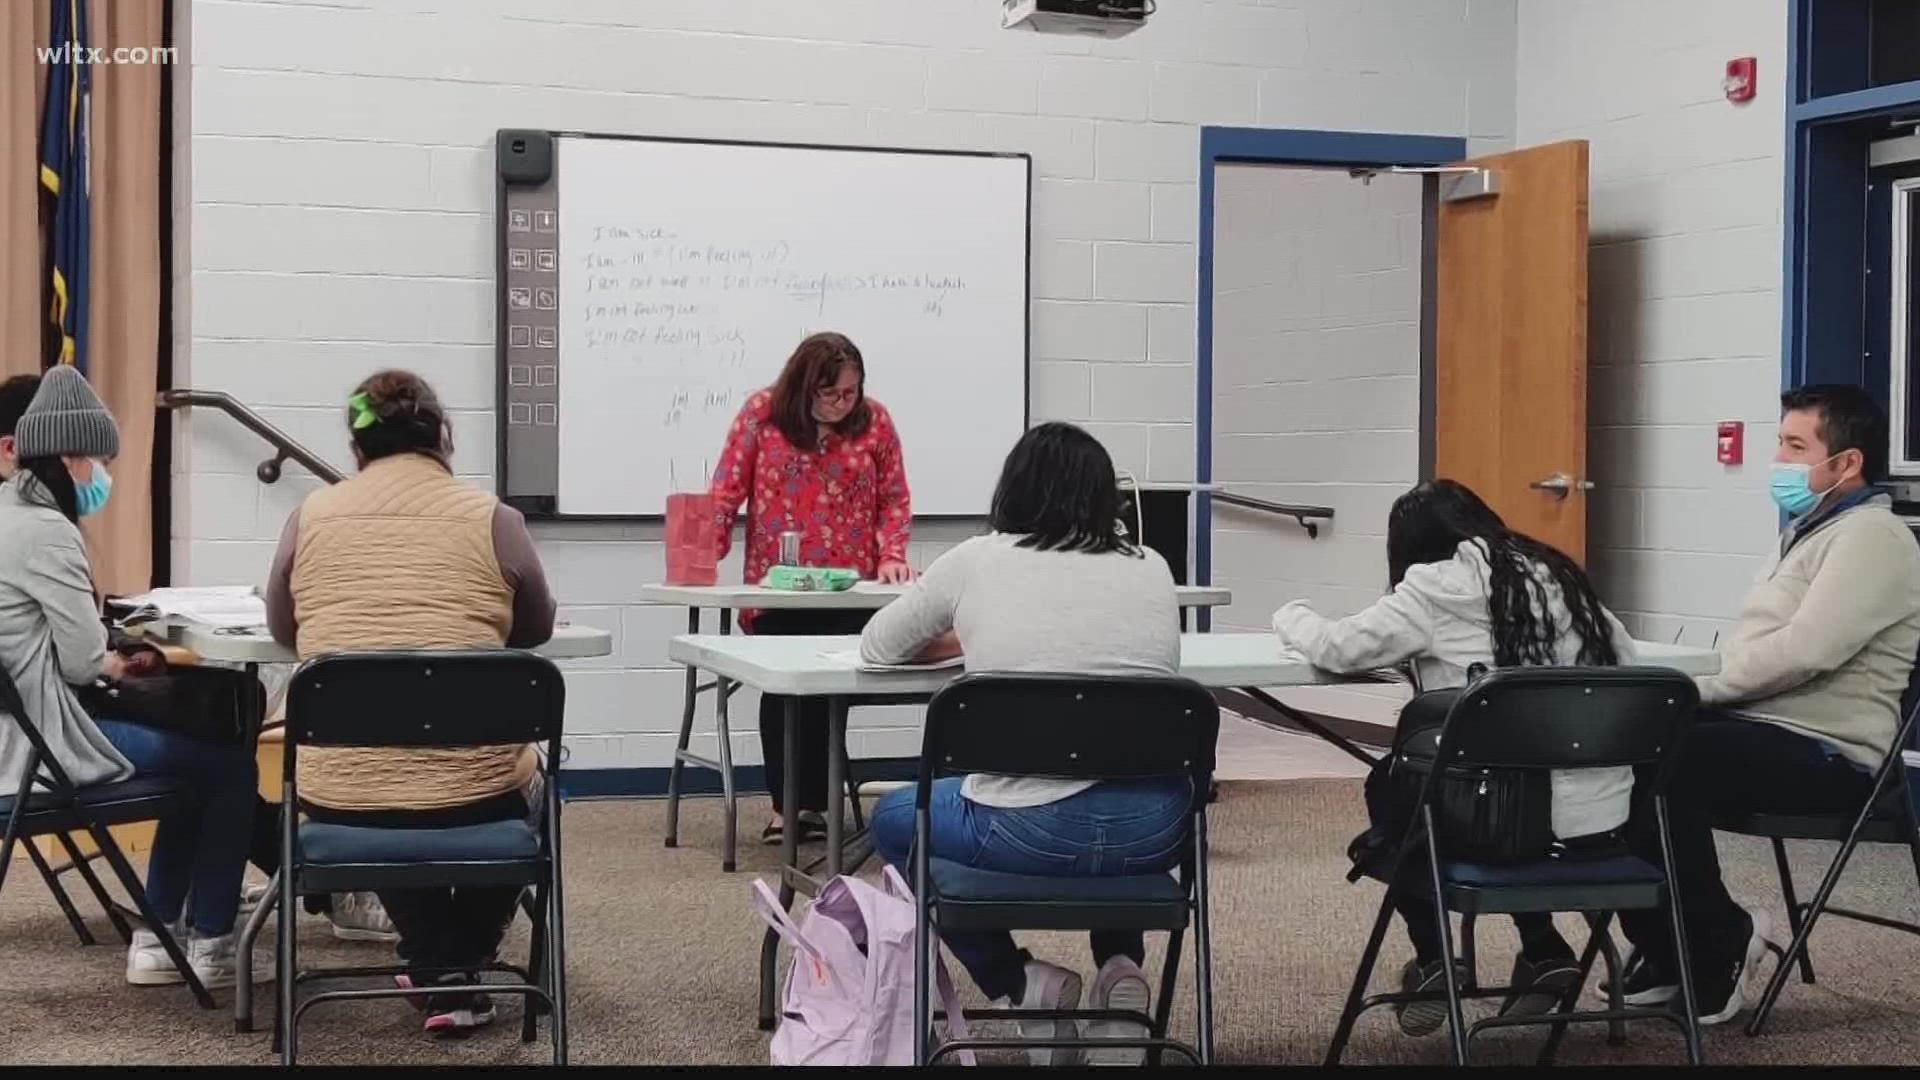 A group in the Midlands is helping native Spanish speakers learn English.